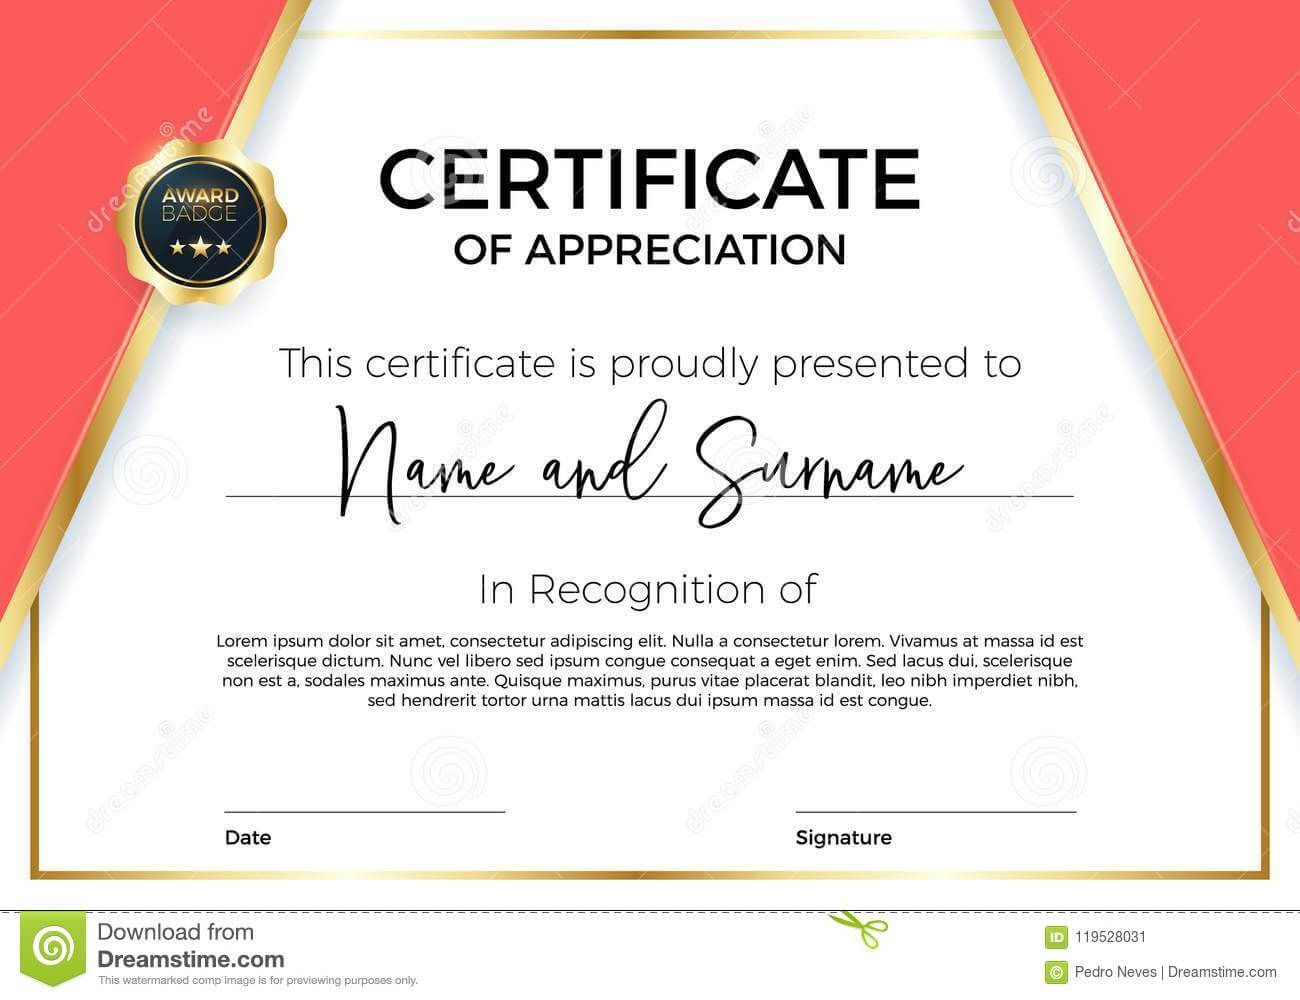 Certificate Of Appreciation Or Achievement With Award Badge In Free Printable Blank Award Certificate Templates